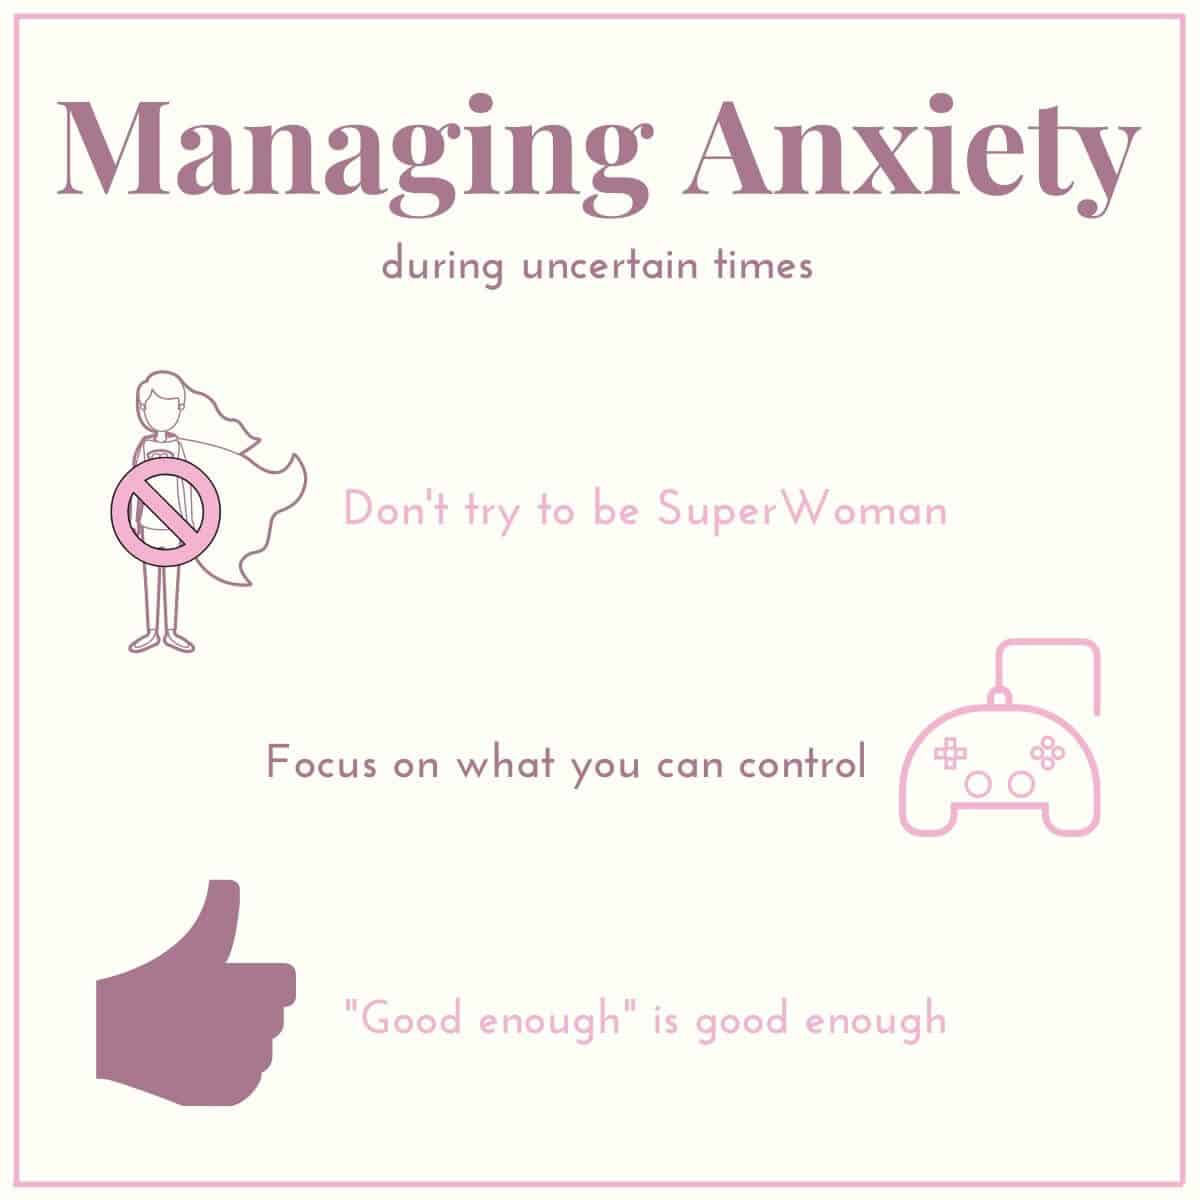 three-ways-of-managing-anxiety-during-times-of-uncertainty-by-controlling-what-you-can